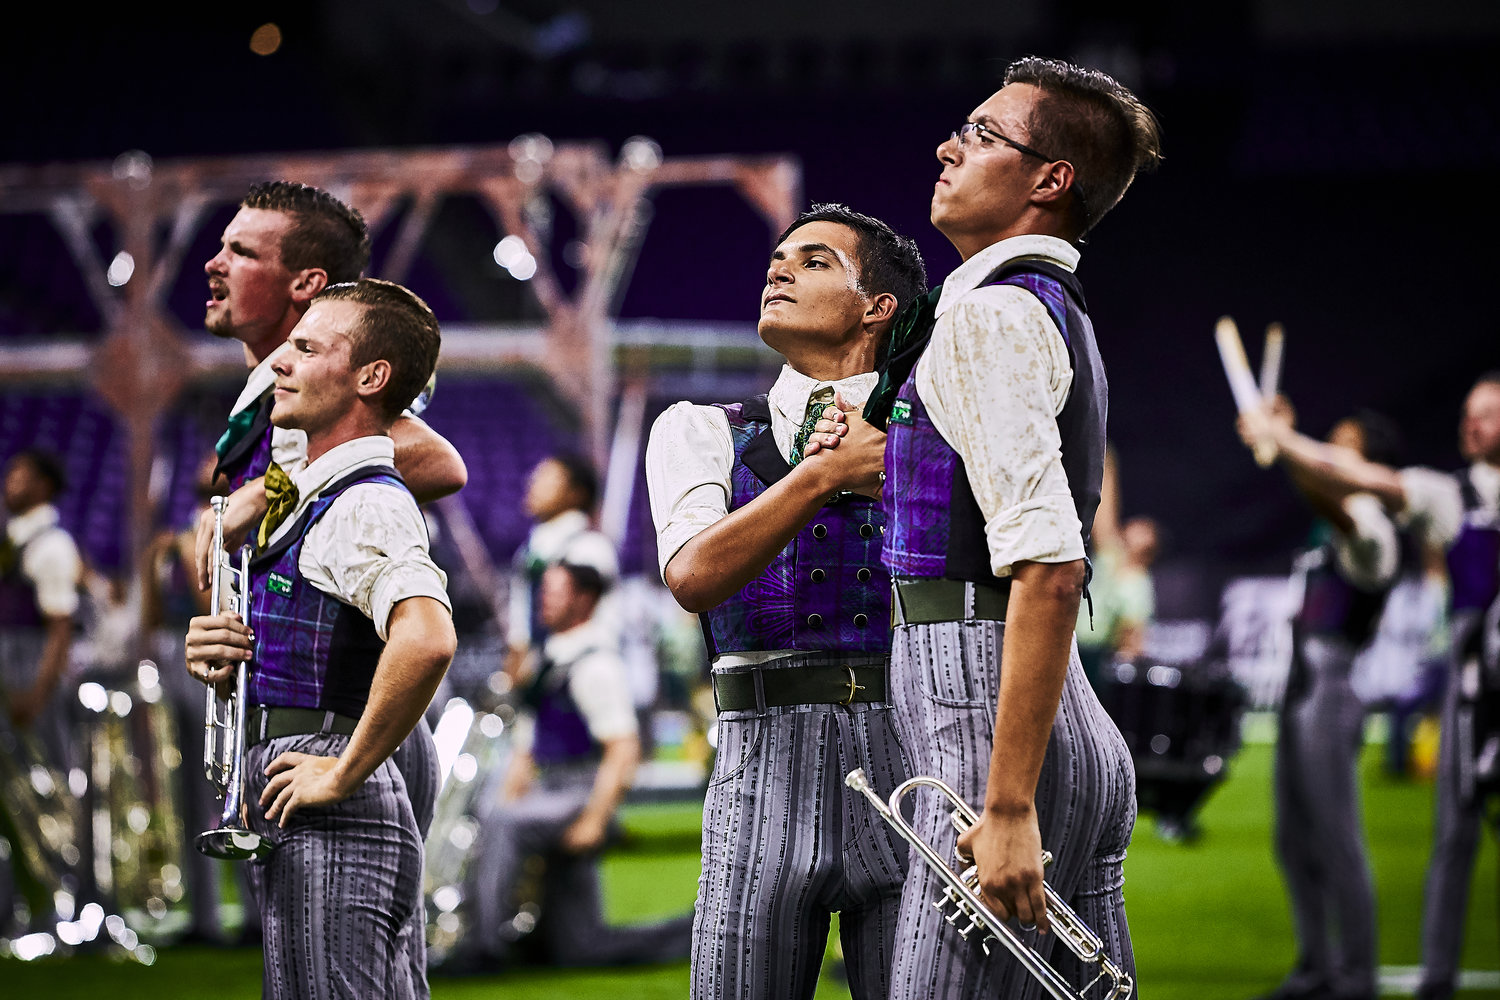 Cavaliers Drum & Bugle Corps finish 3rd